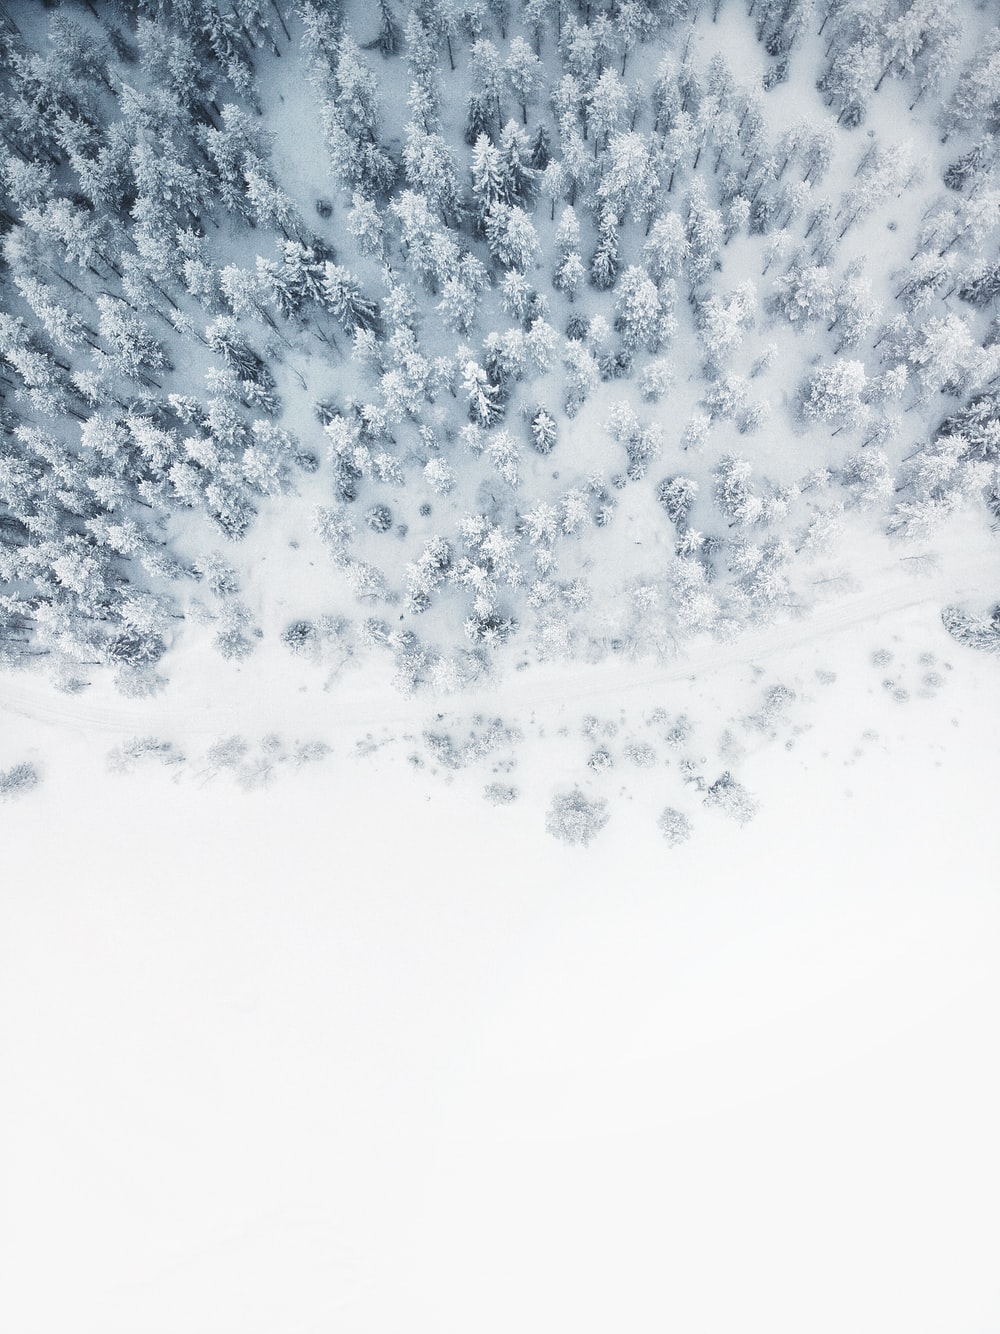 Snow Picture. Download Free Image